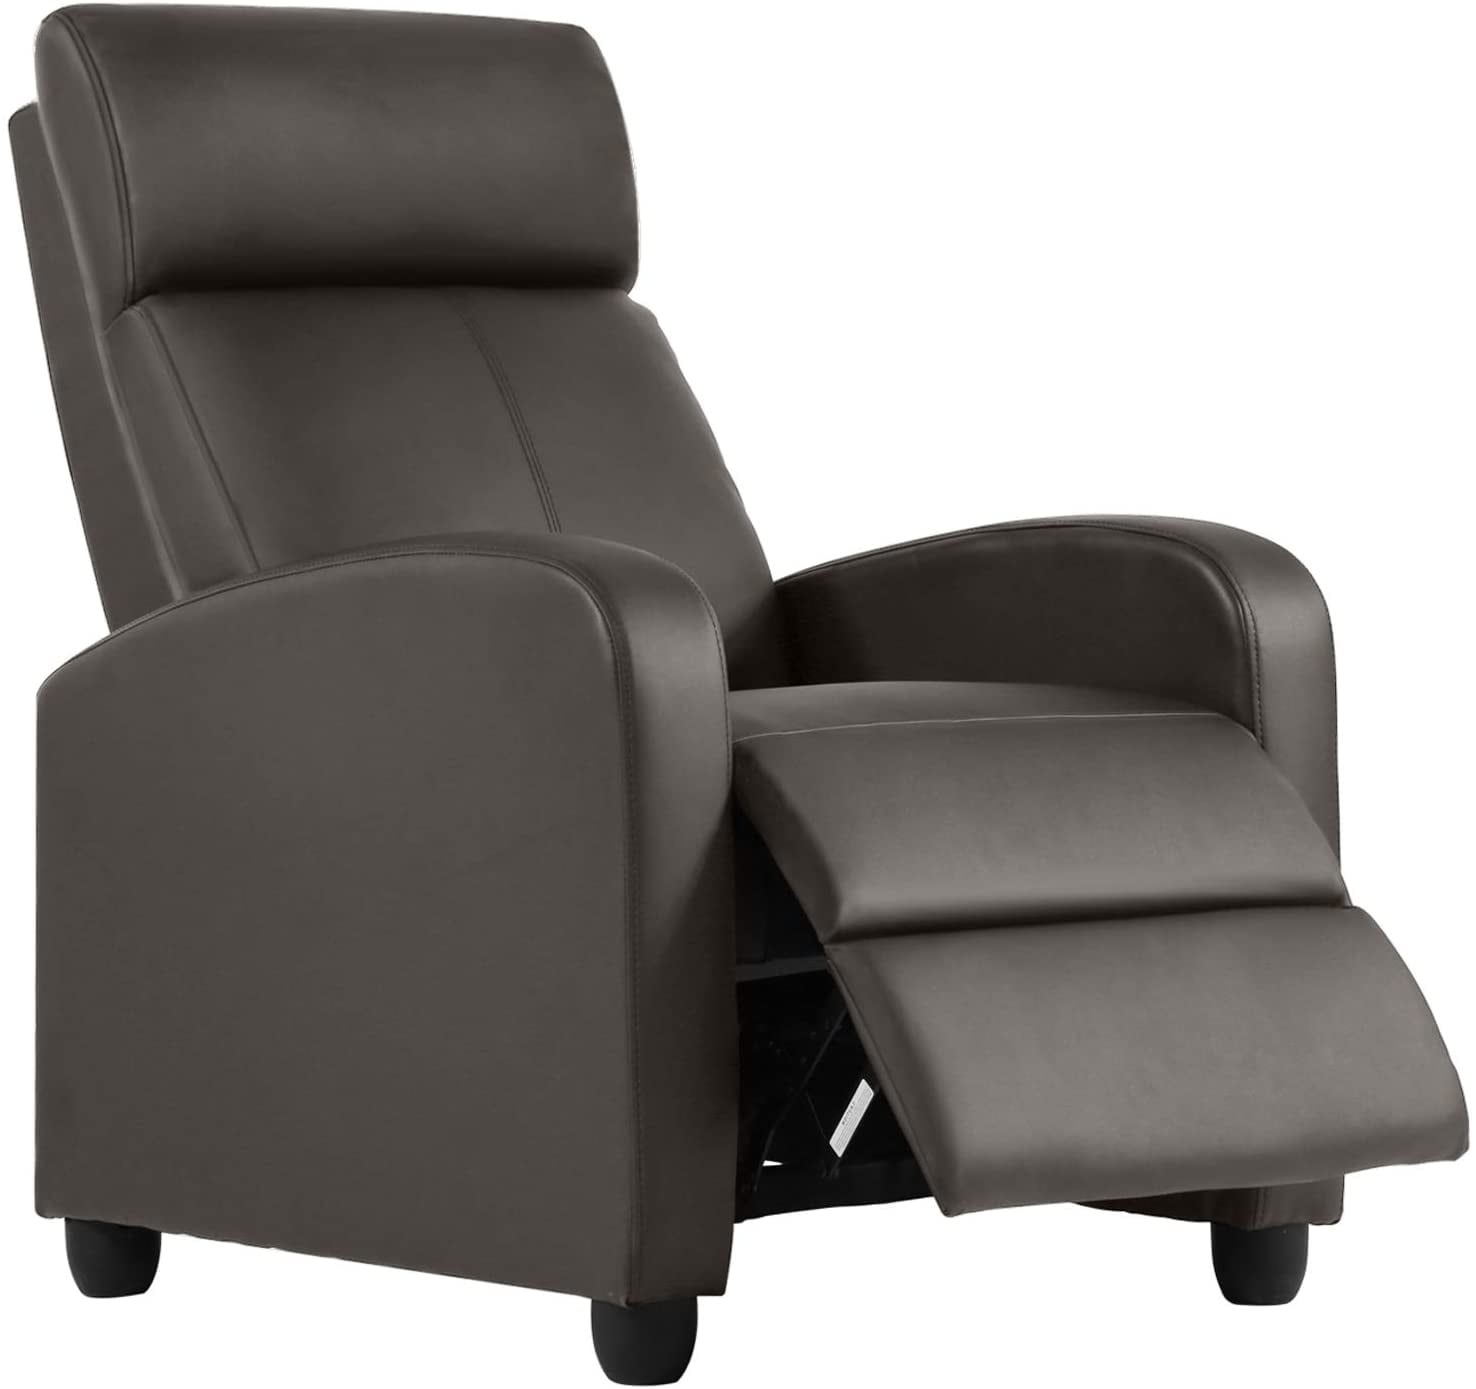 Dropship Recliner Chair PU Leather Recliner Sofa Home Theater